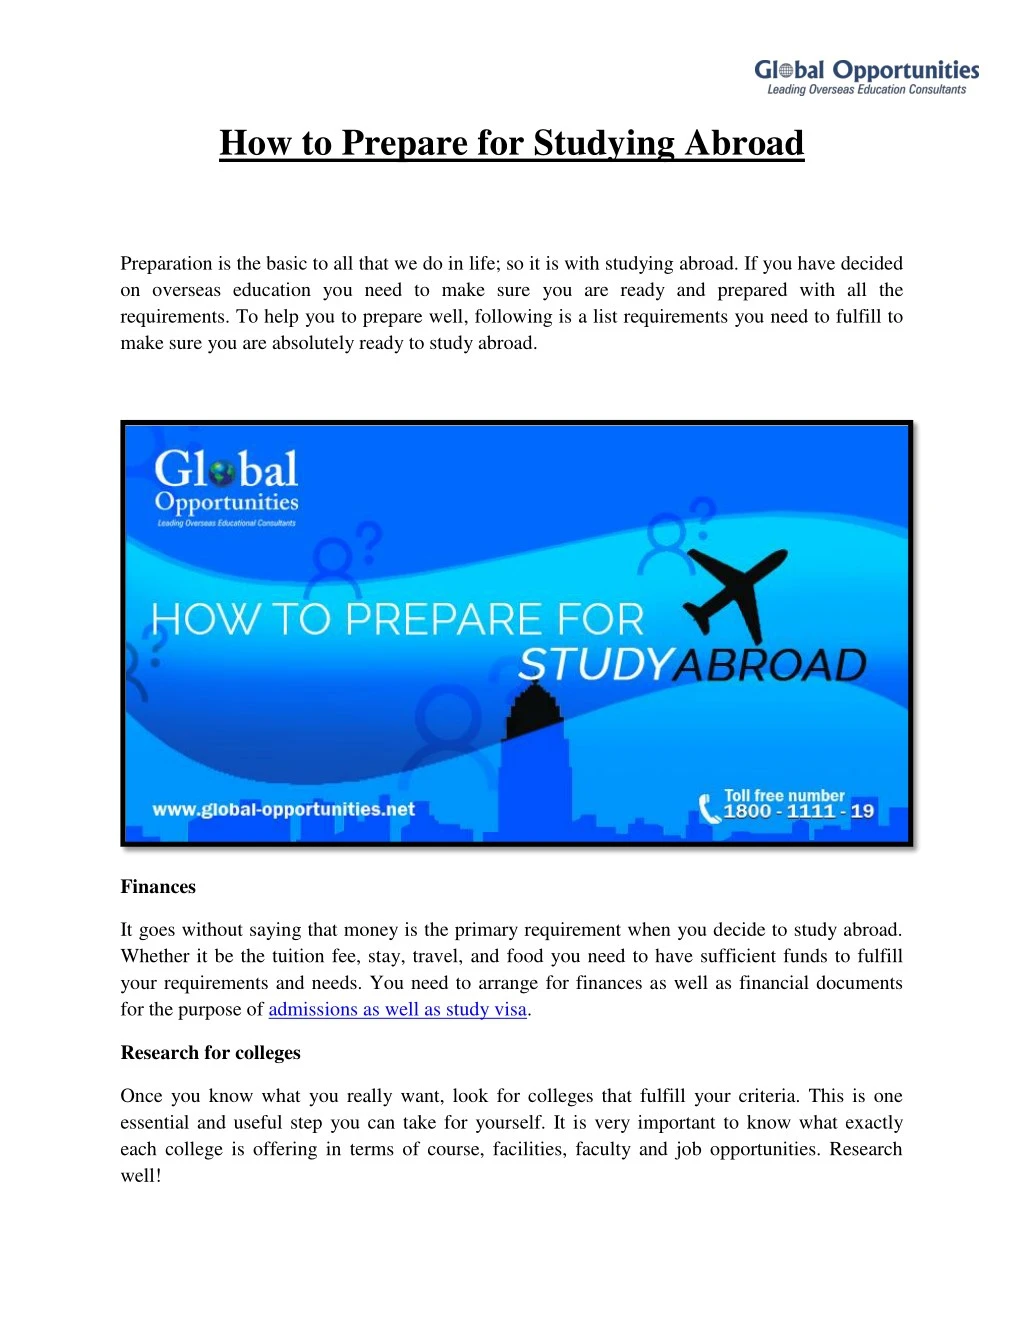 how to prepare for studying abroad